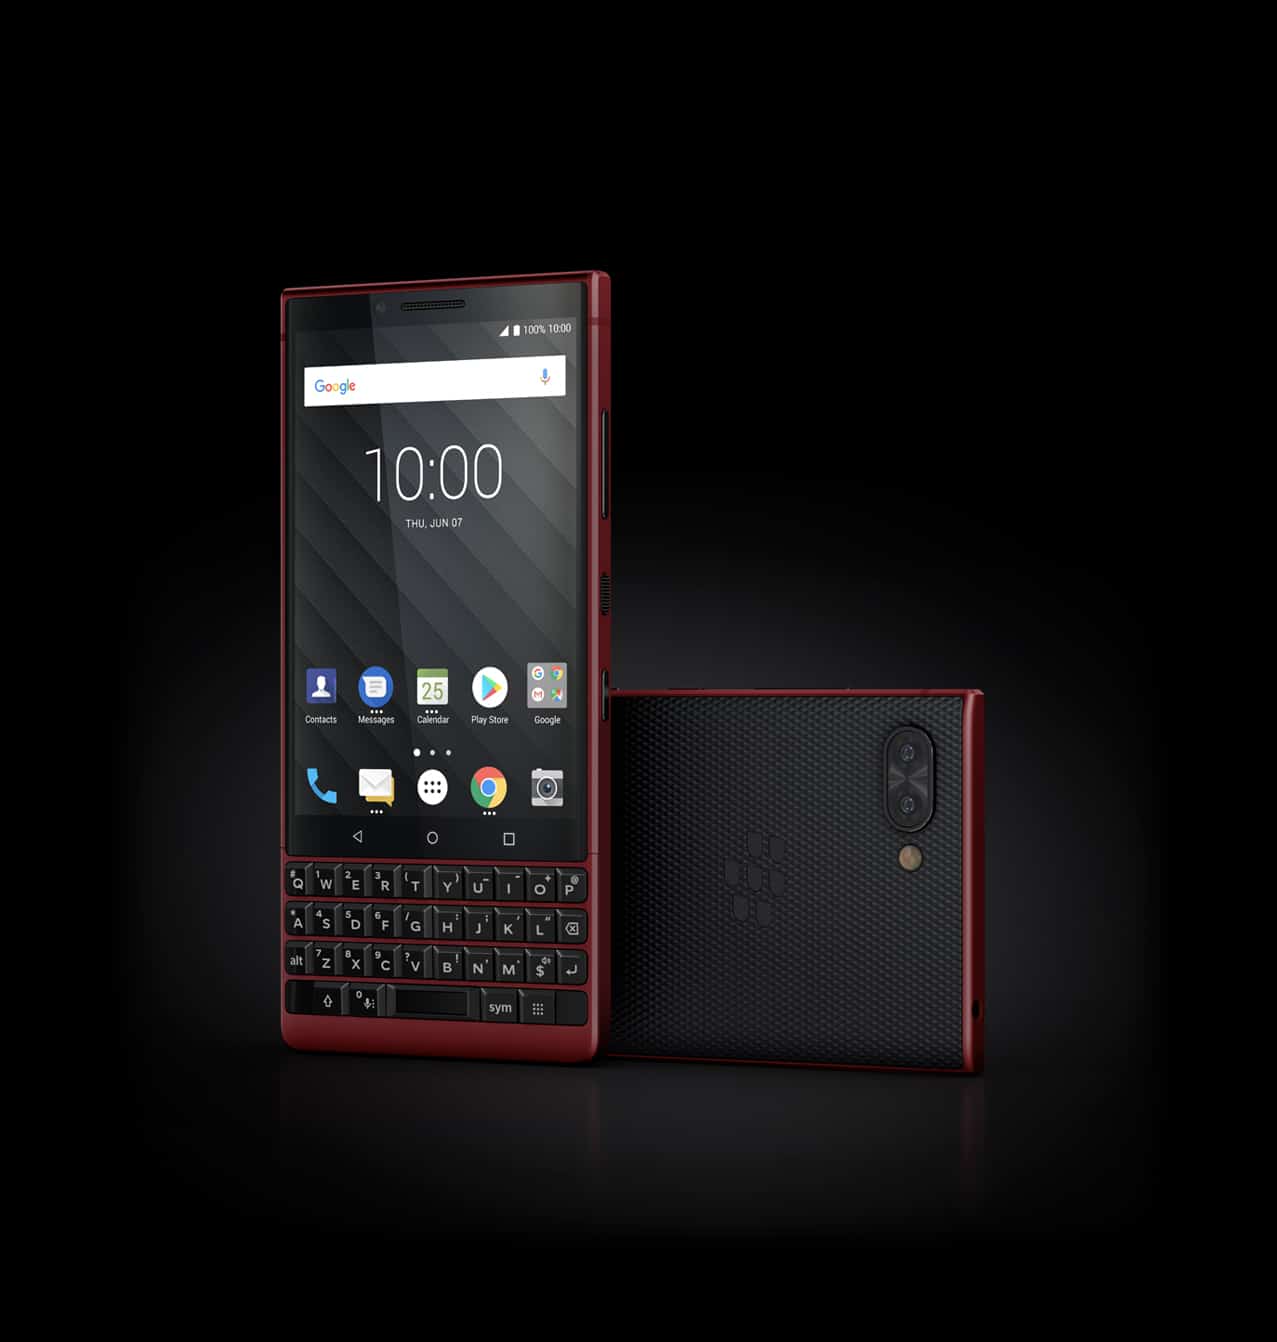 Blackberry key2 red edition announced with 6gb ram, 128gb storage & a €779 price